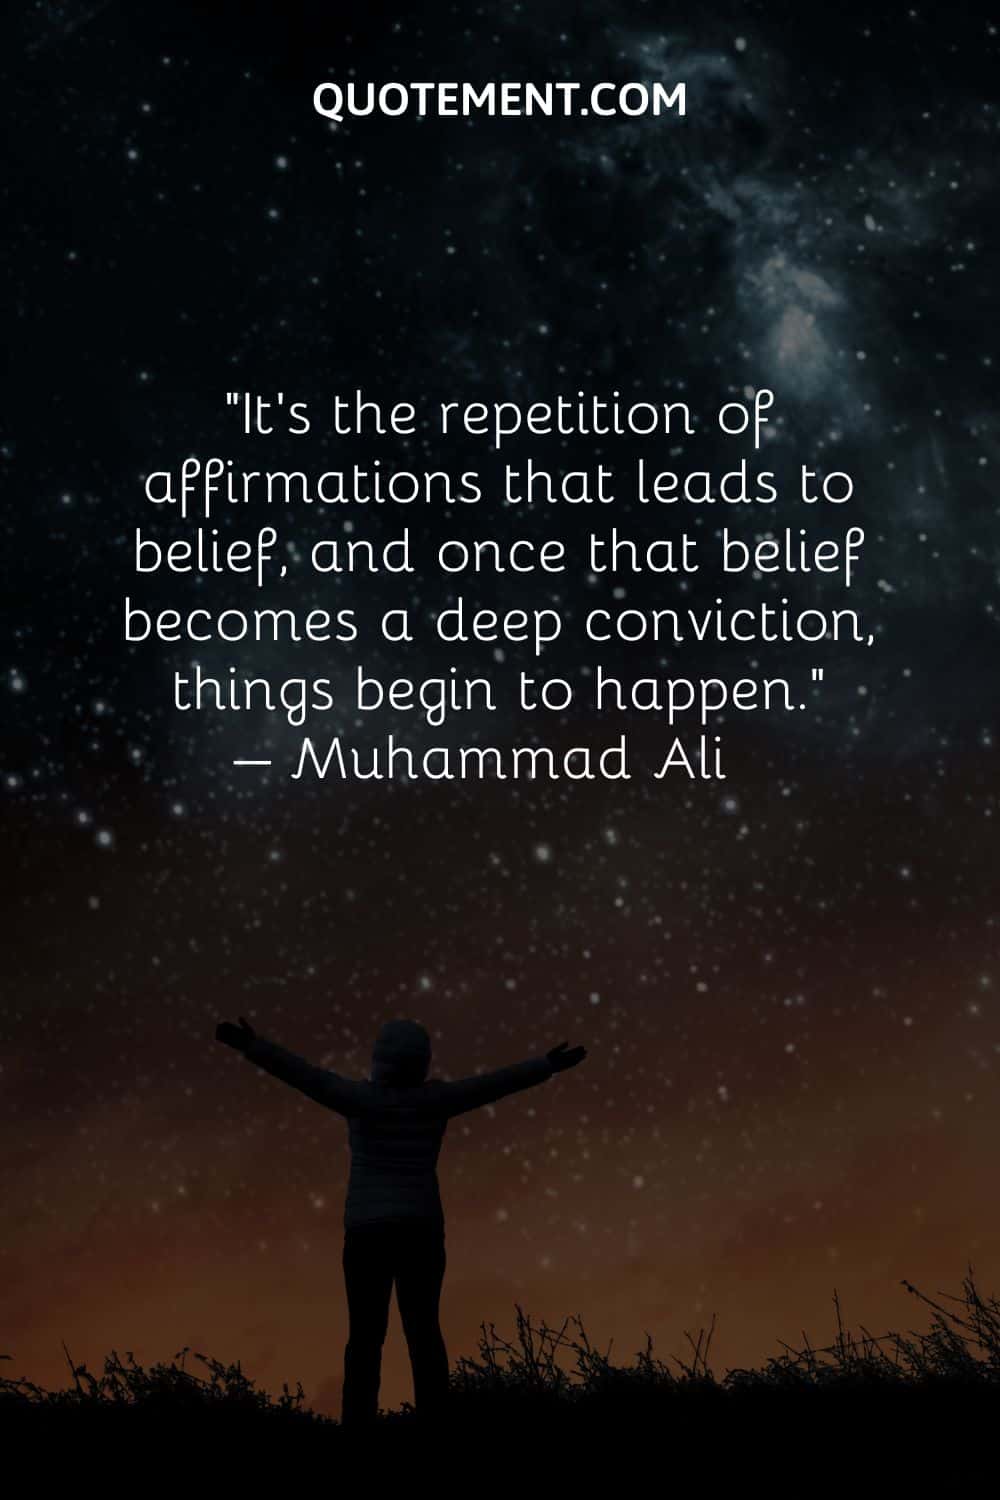 It’s the repetition of affirmations that leads to belief